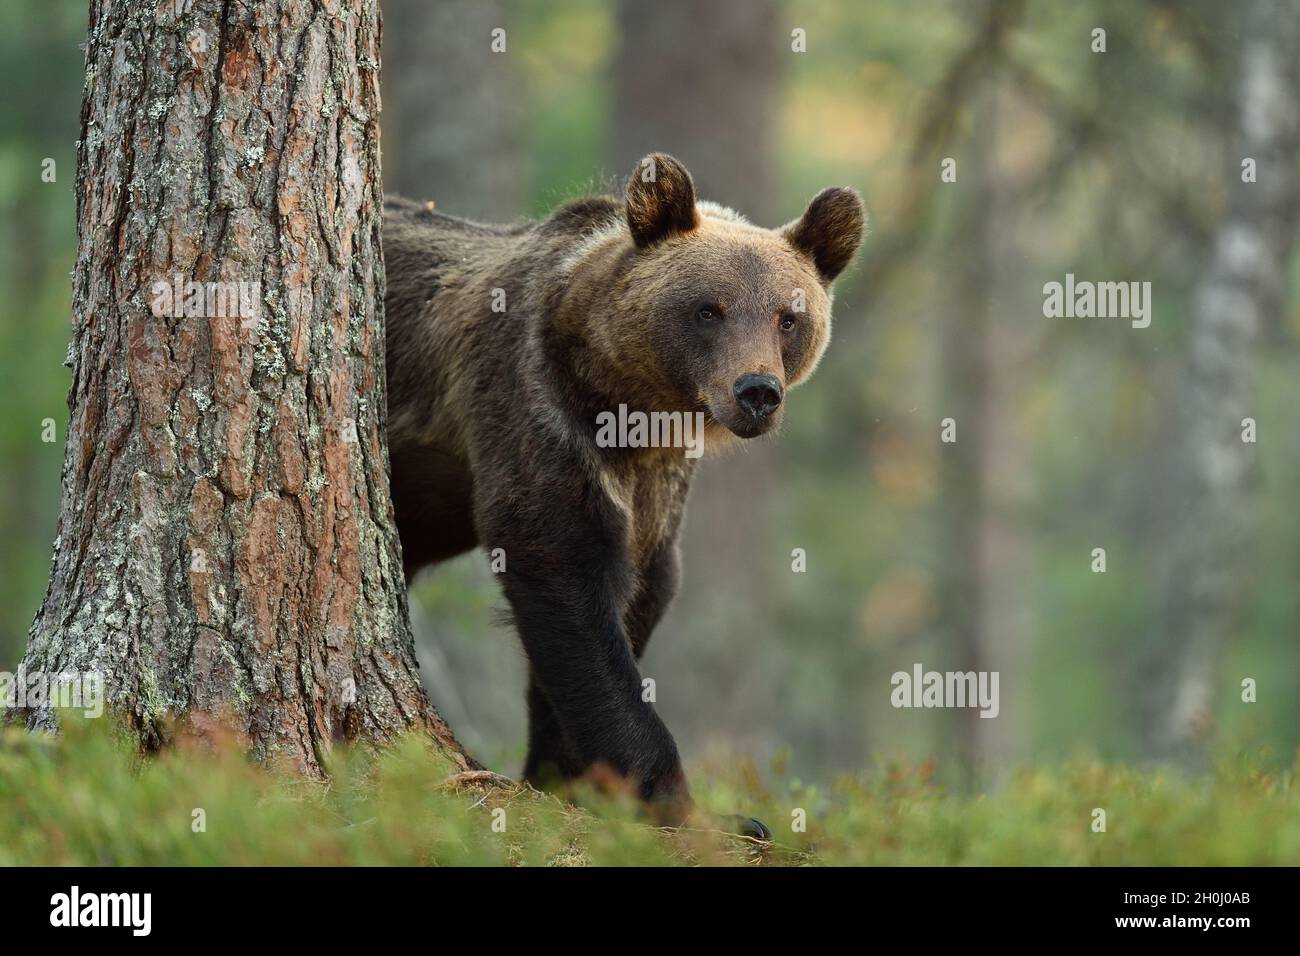 brown bear walking in forest. brown bear coming out behind a tree. Stock Photo